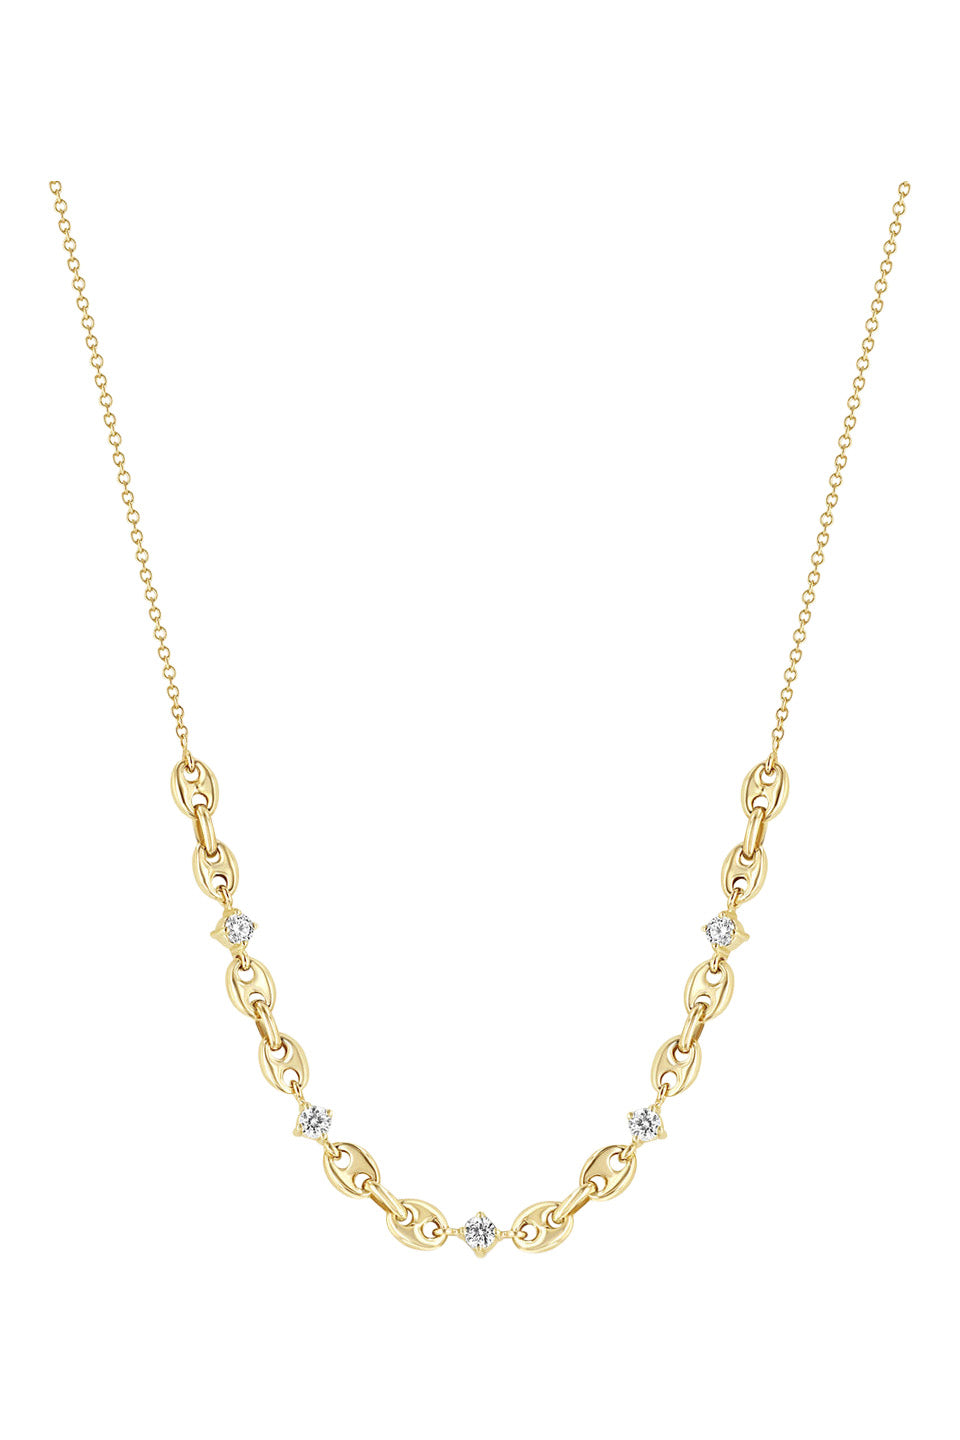 Zoe Chicco 5 Prong Diamond Small Puffed Mariner Station Necklace in 14k Yellow Gold